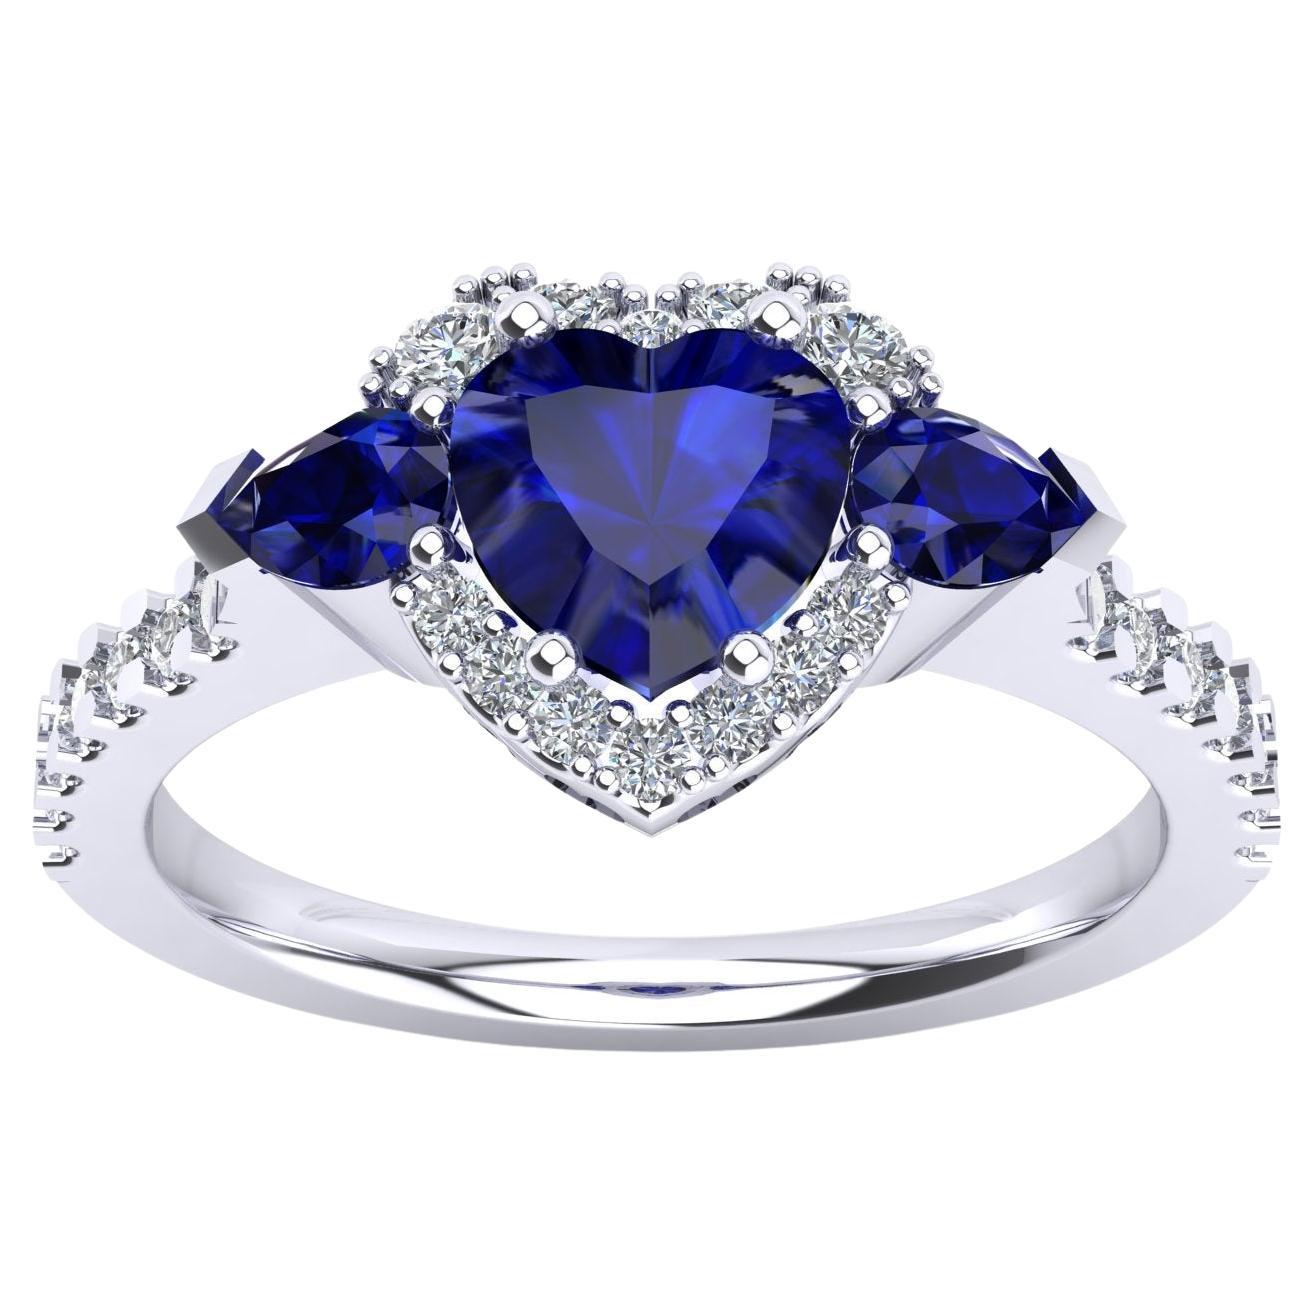 For Sale:  Heart Ring with Blue Sapphires and Diamonds, 18 Karat White Gold, Made in Italy